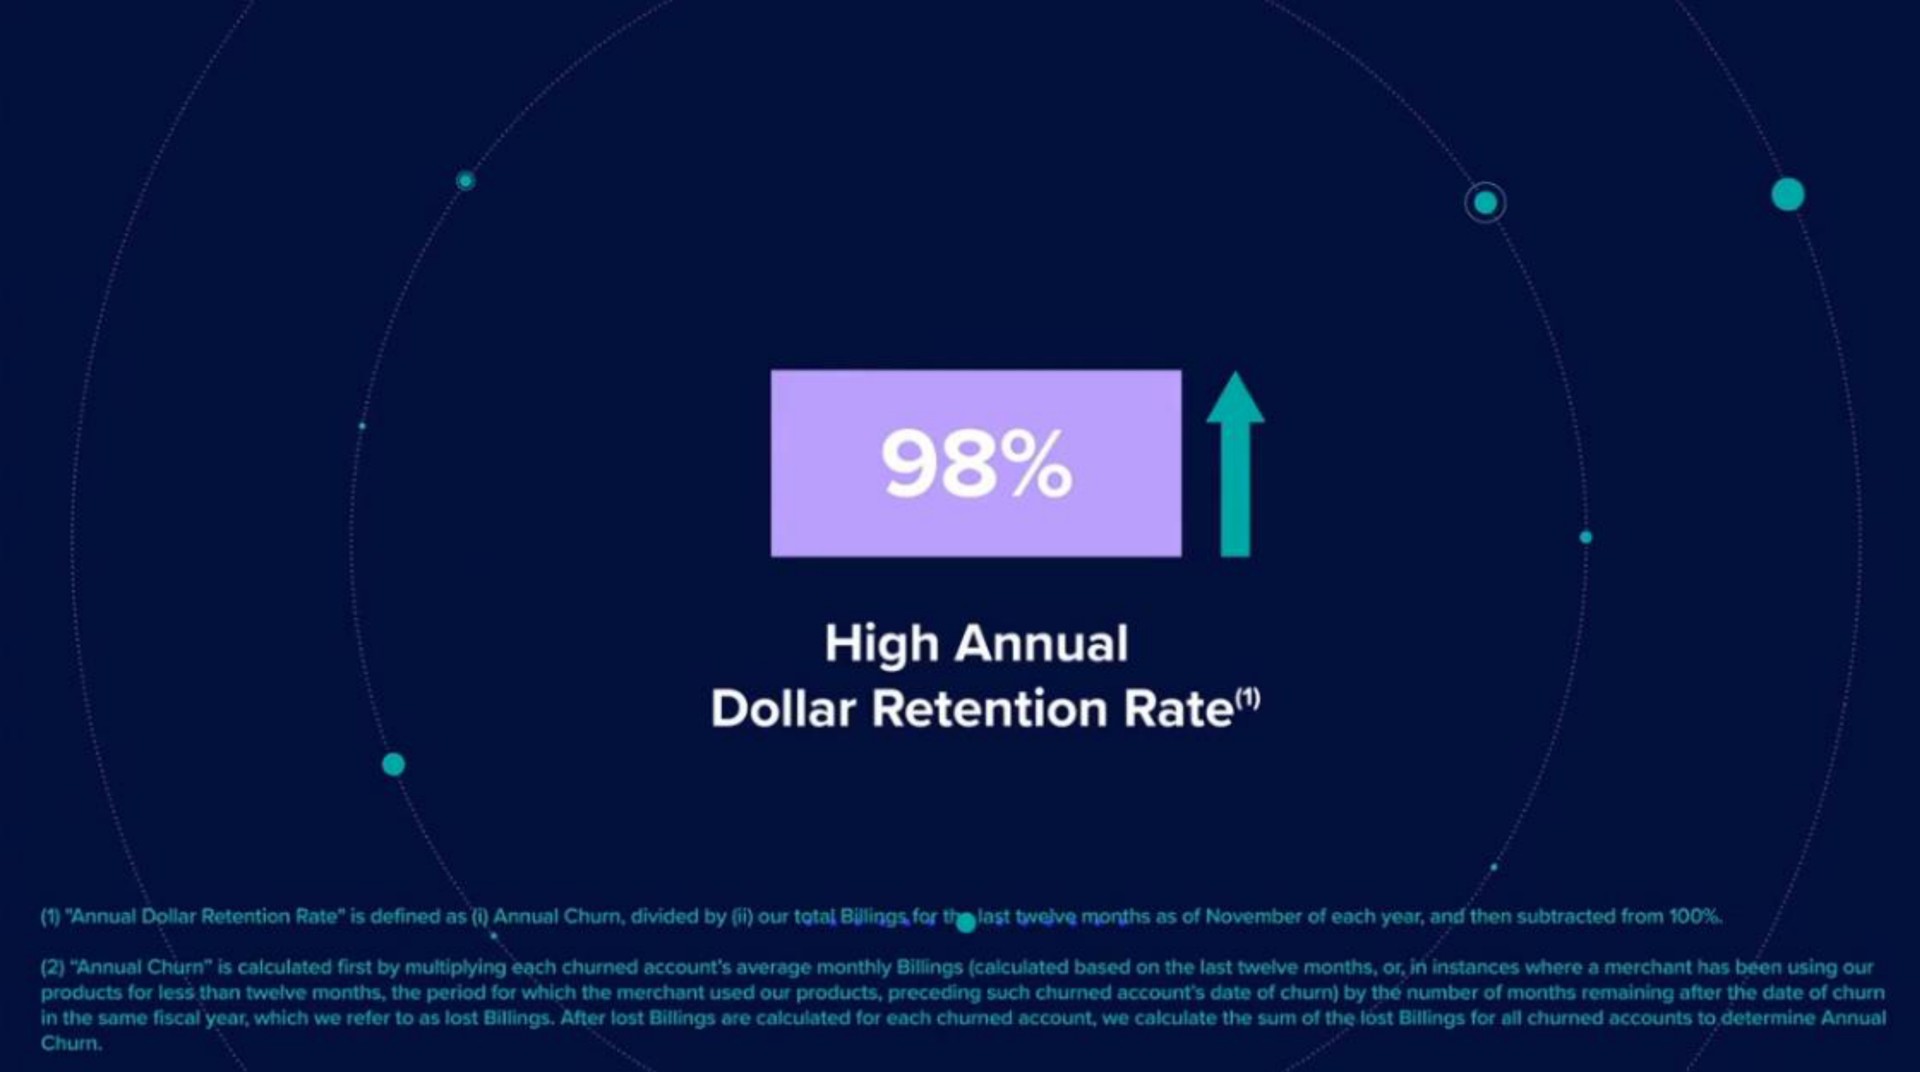 high annual dollar retention rate | Riskified